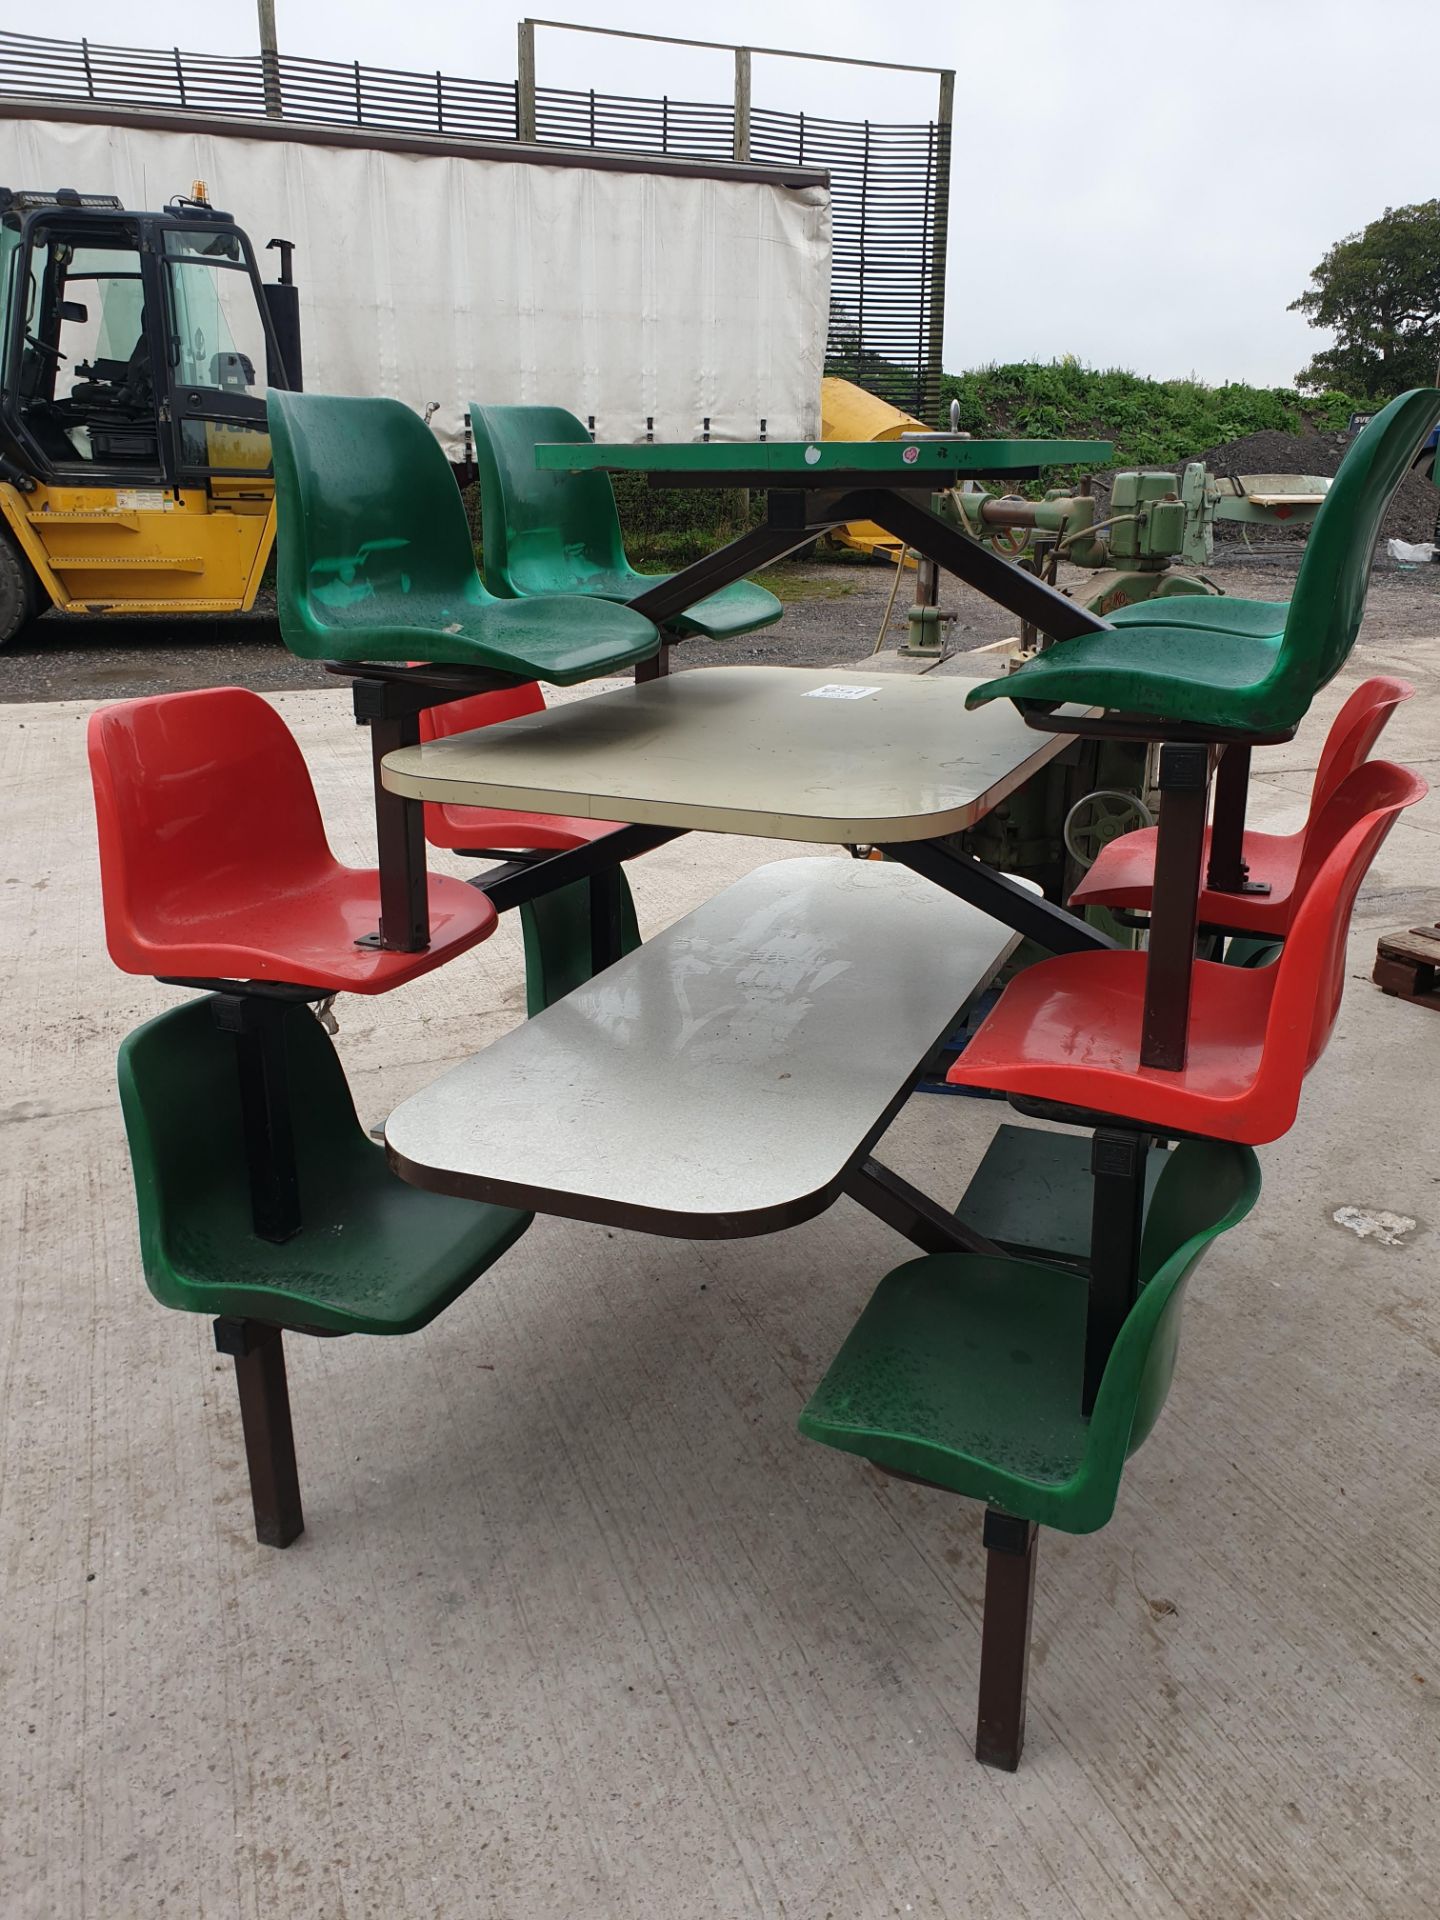 3x Canteen Seating Systems